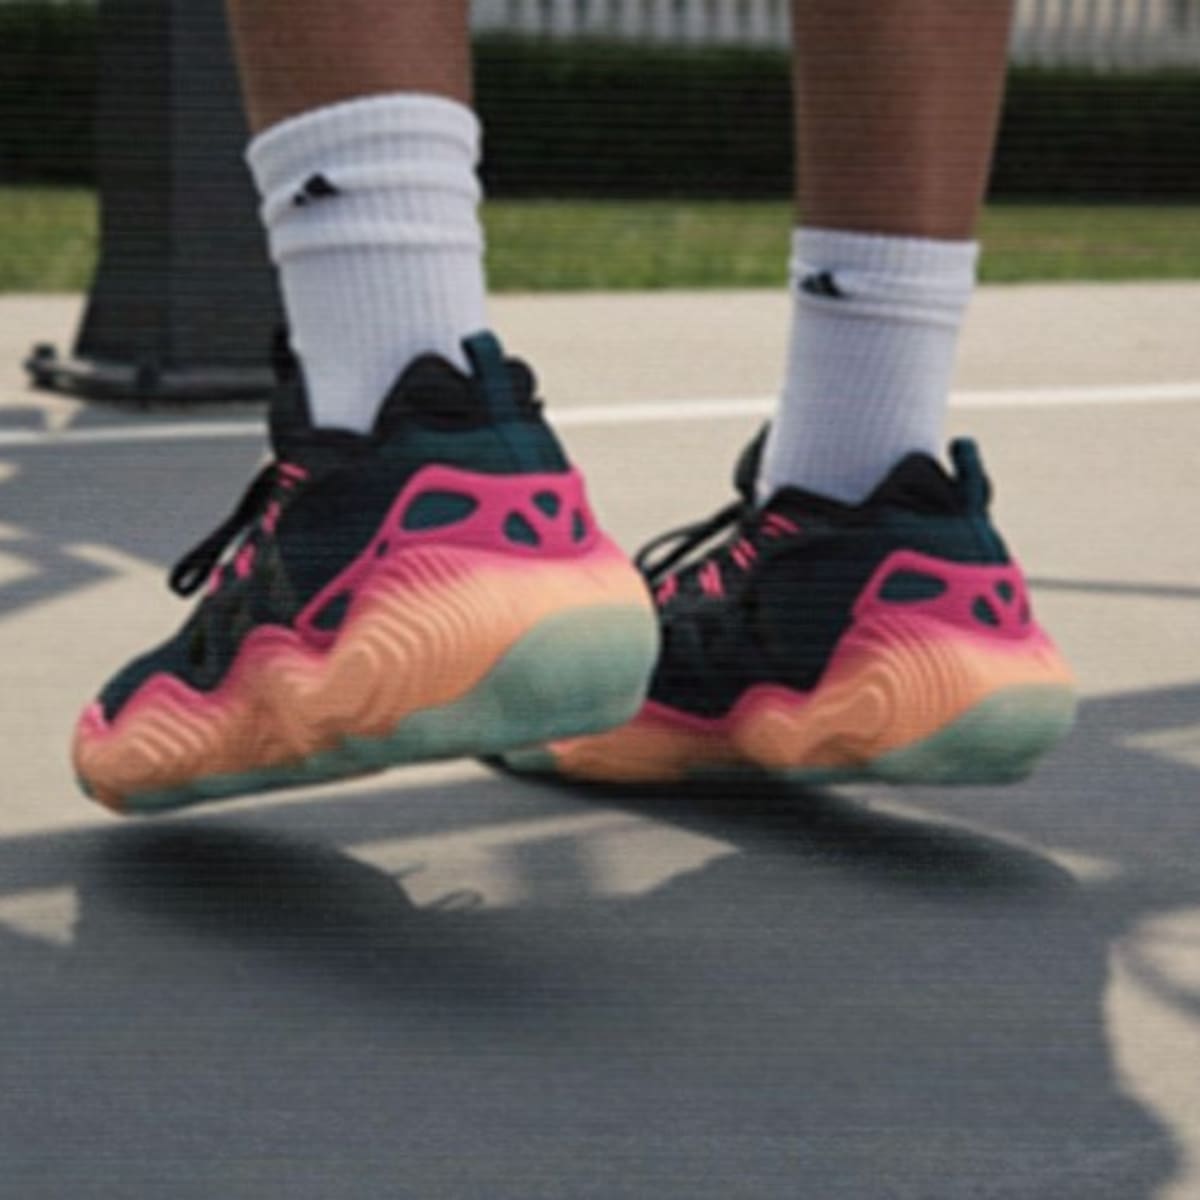 Adidas Trae Young 1 Performance Review – Hoops Sneakers